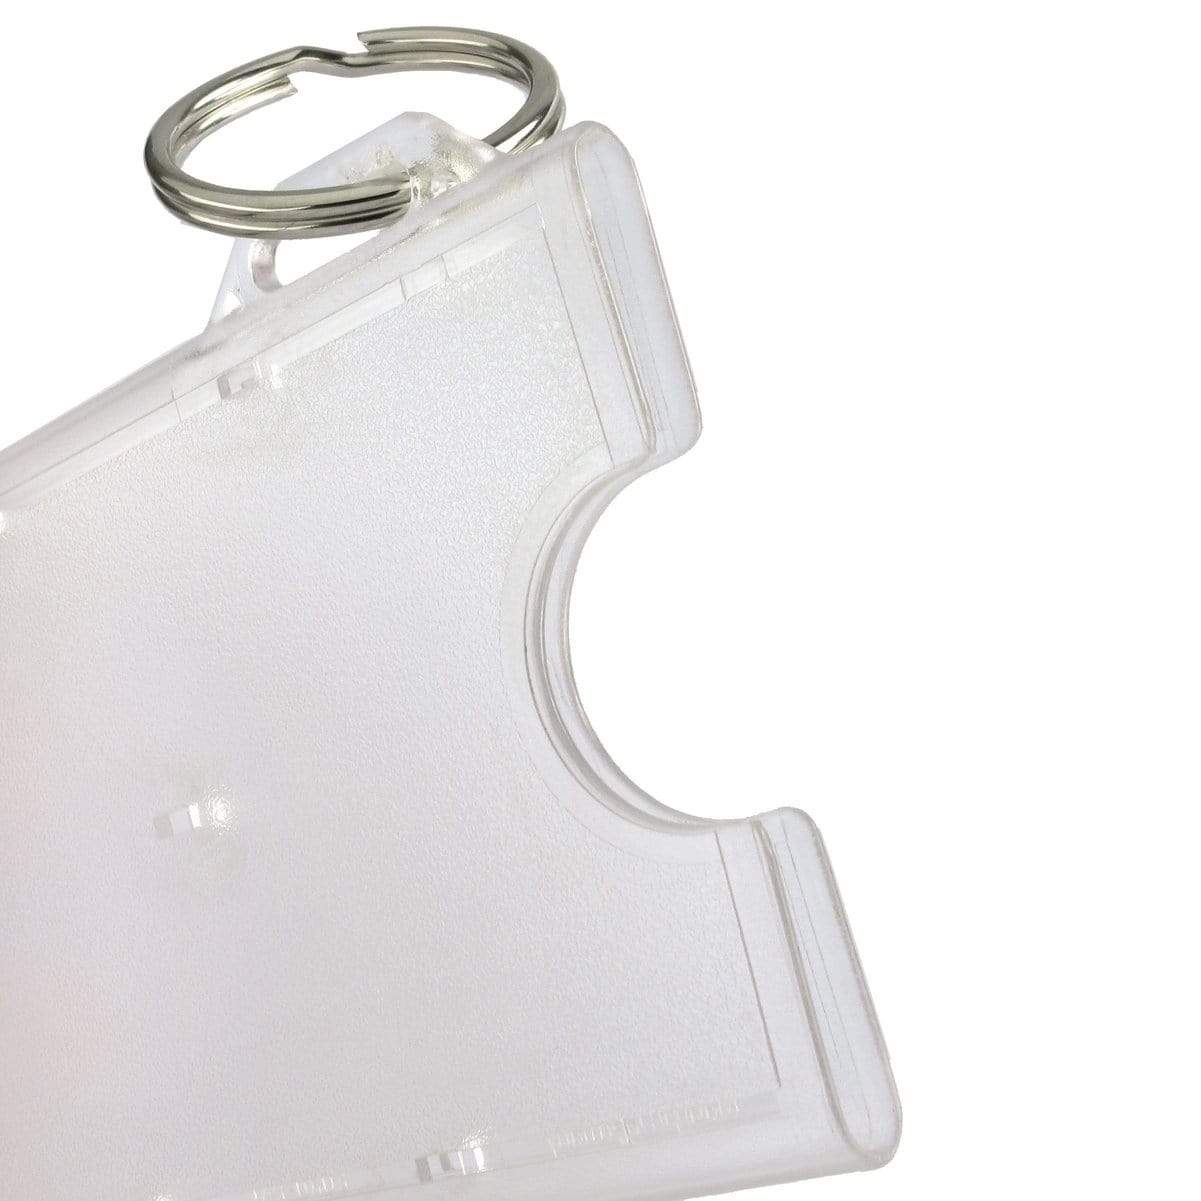 Spid Secure Fuel Card Holder with Key Ring (SPID-FUELCARD-RNG-C)